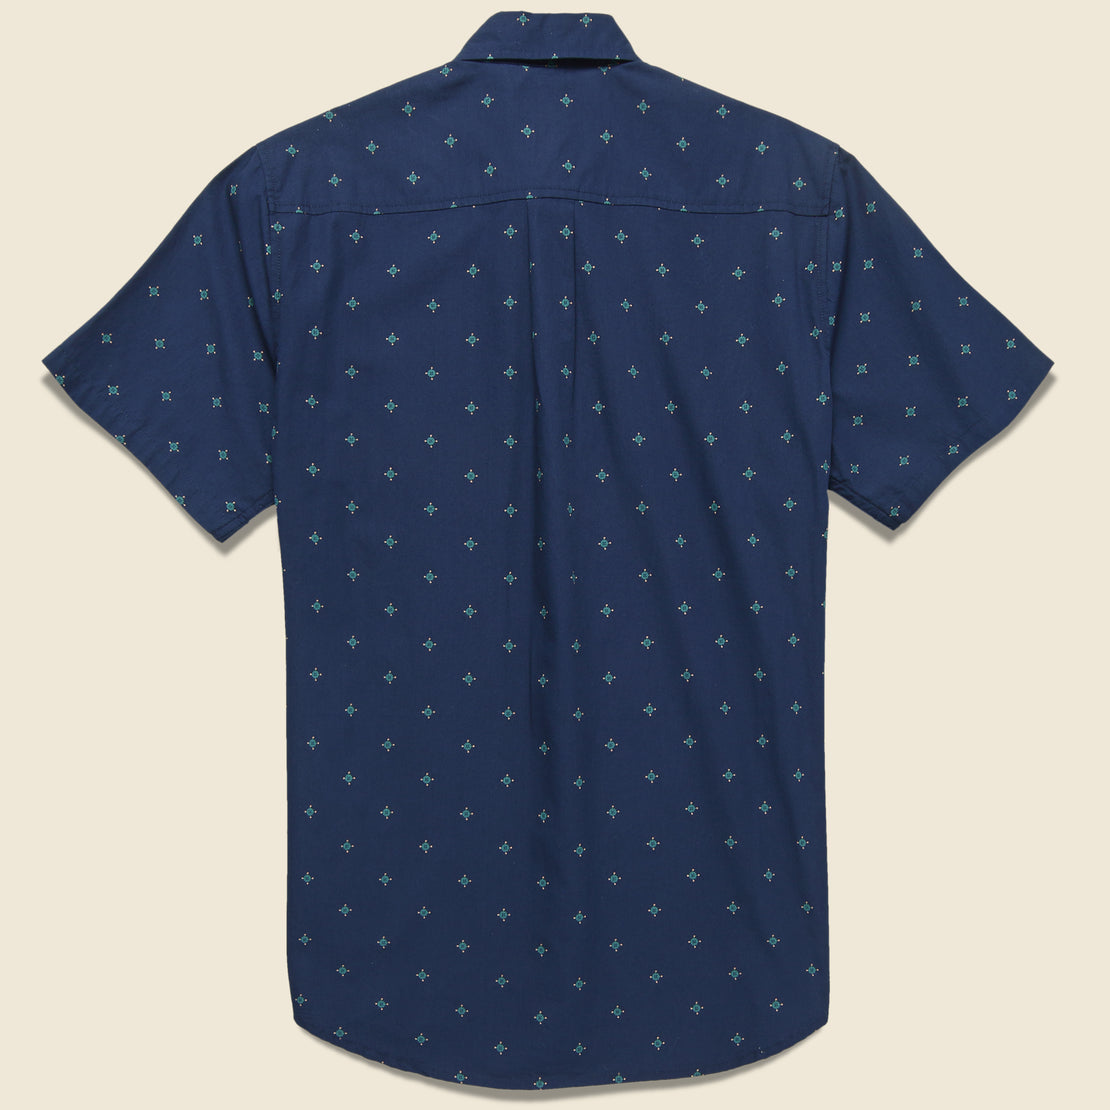 Santa Fe Shirt - Navy - Katin - STAG Provisions - Tops - S/S Woven - Other Pattern